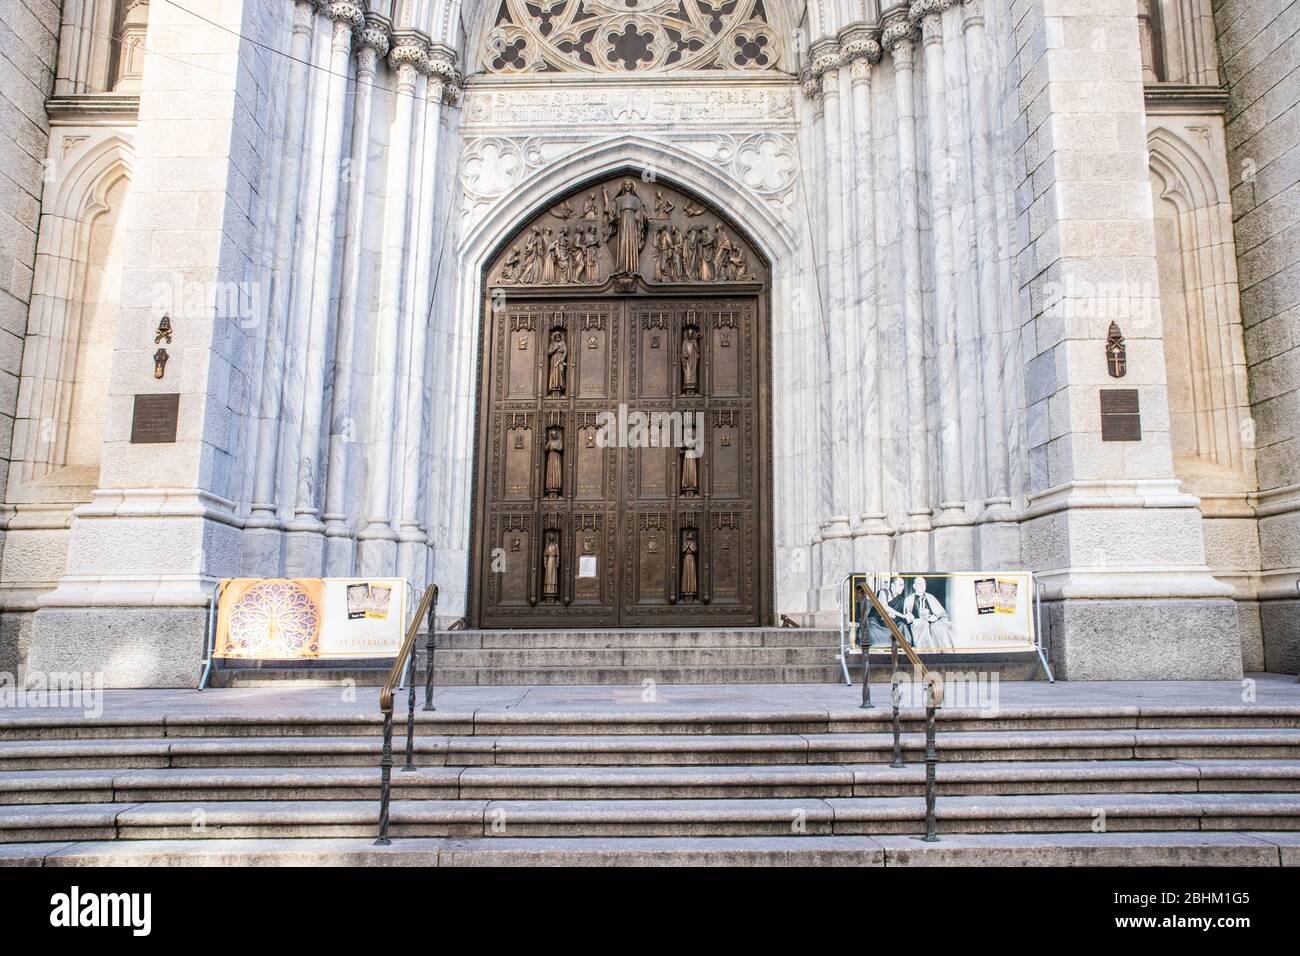 NEW YORK CITY - APRIL 19, 2020:  St. Patrick's Cathedral in midtown Manhattan stands empty with a sign on the doors during the Covid-19 Coronavirus pa Stock Photo